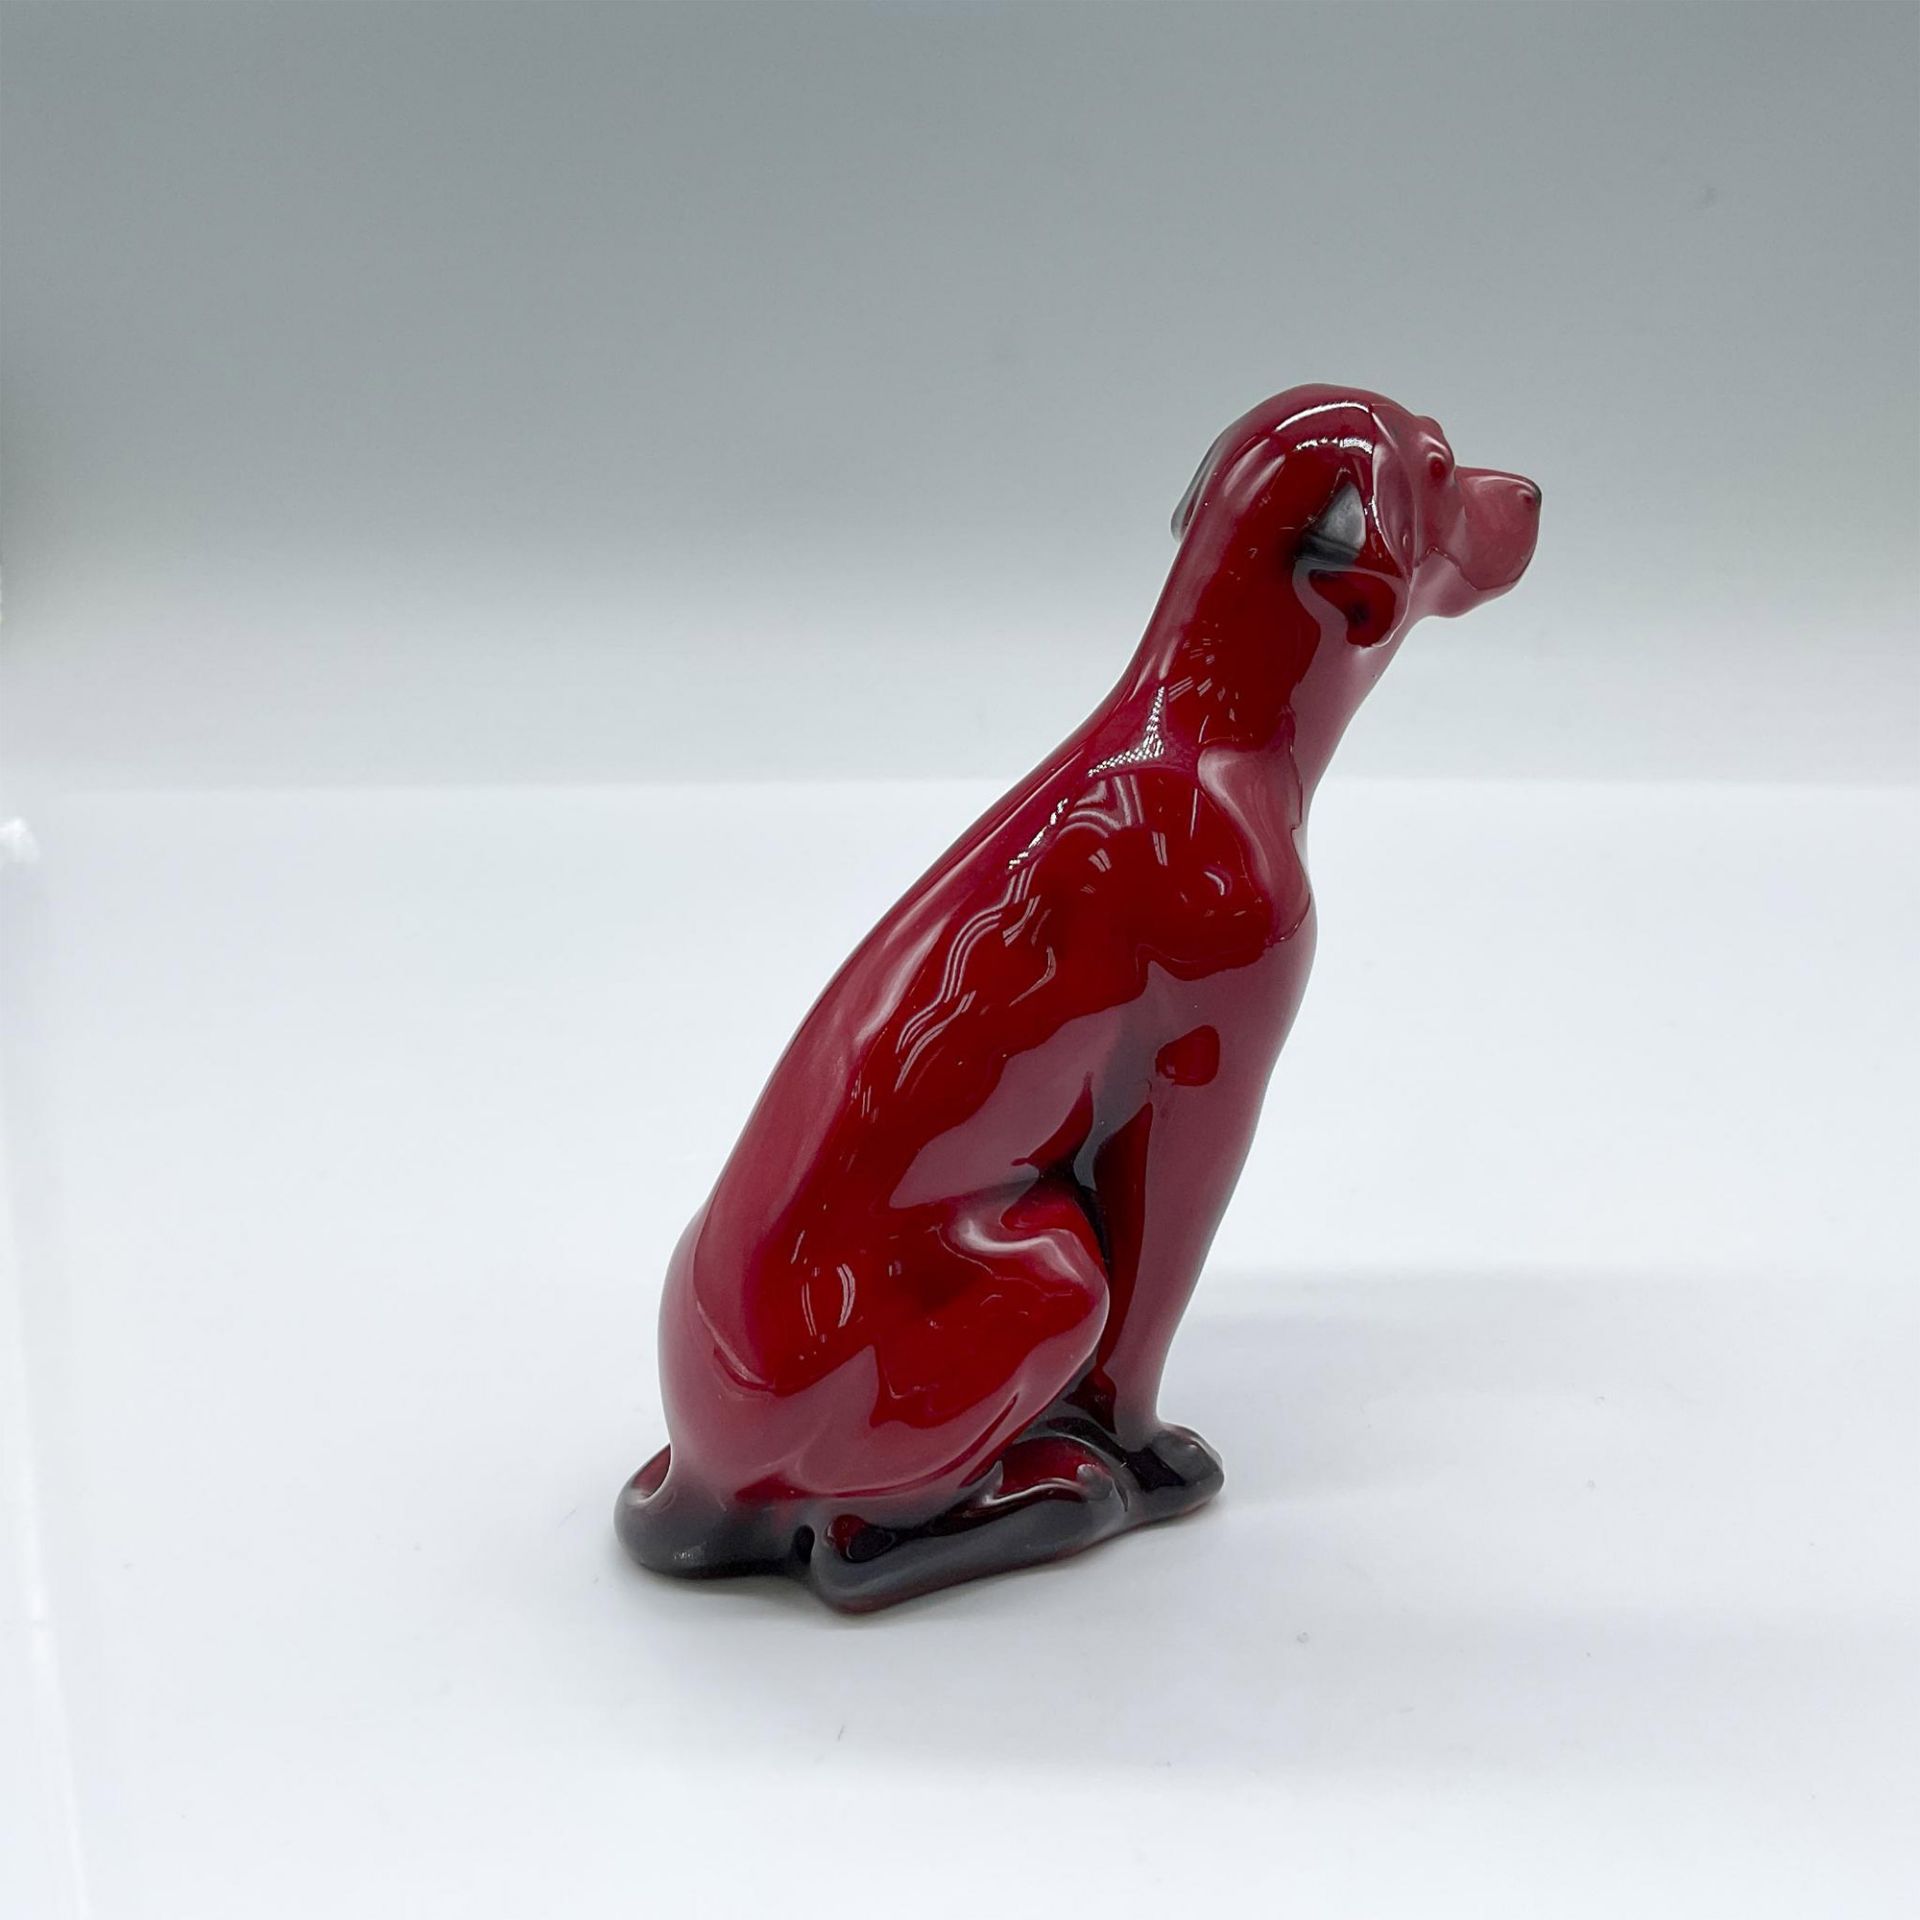 Royal Doulton Flambe Figurine, Foxhound Seated HN166 - Image 3 of 4